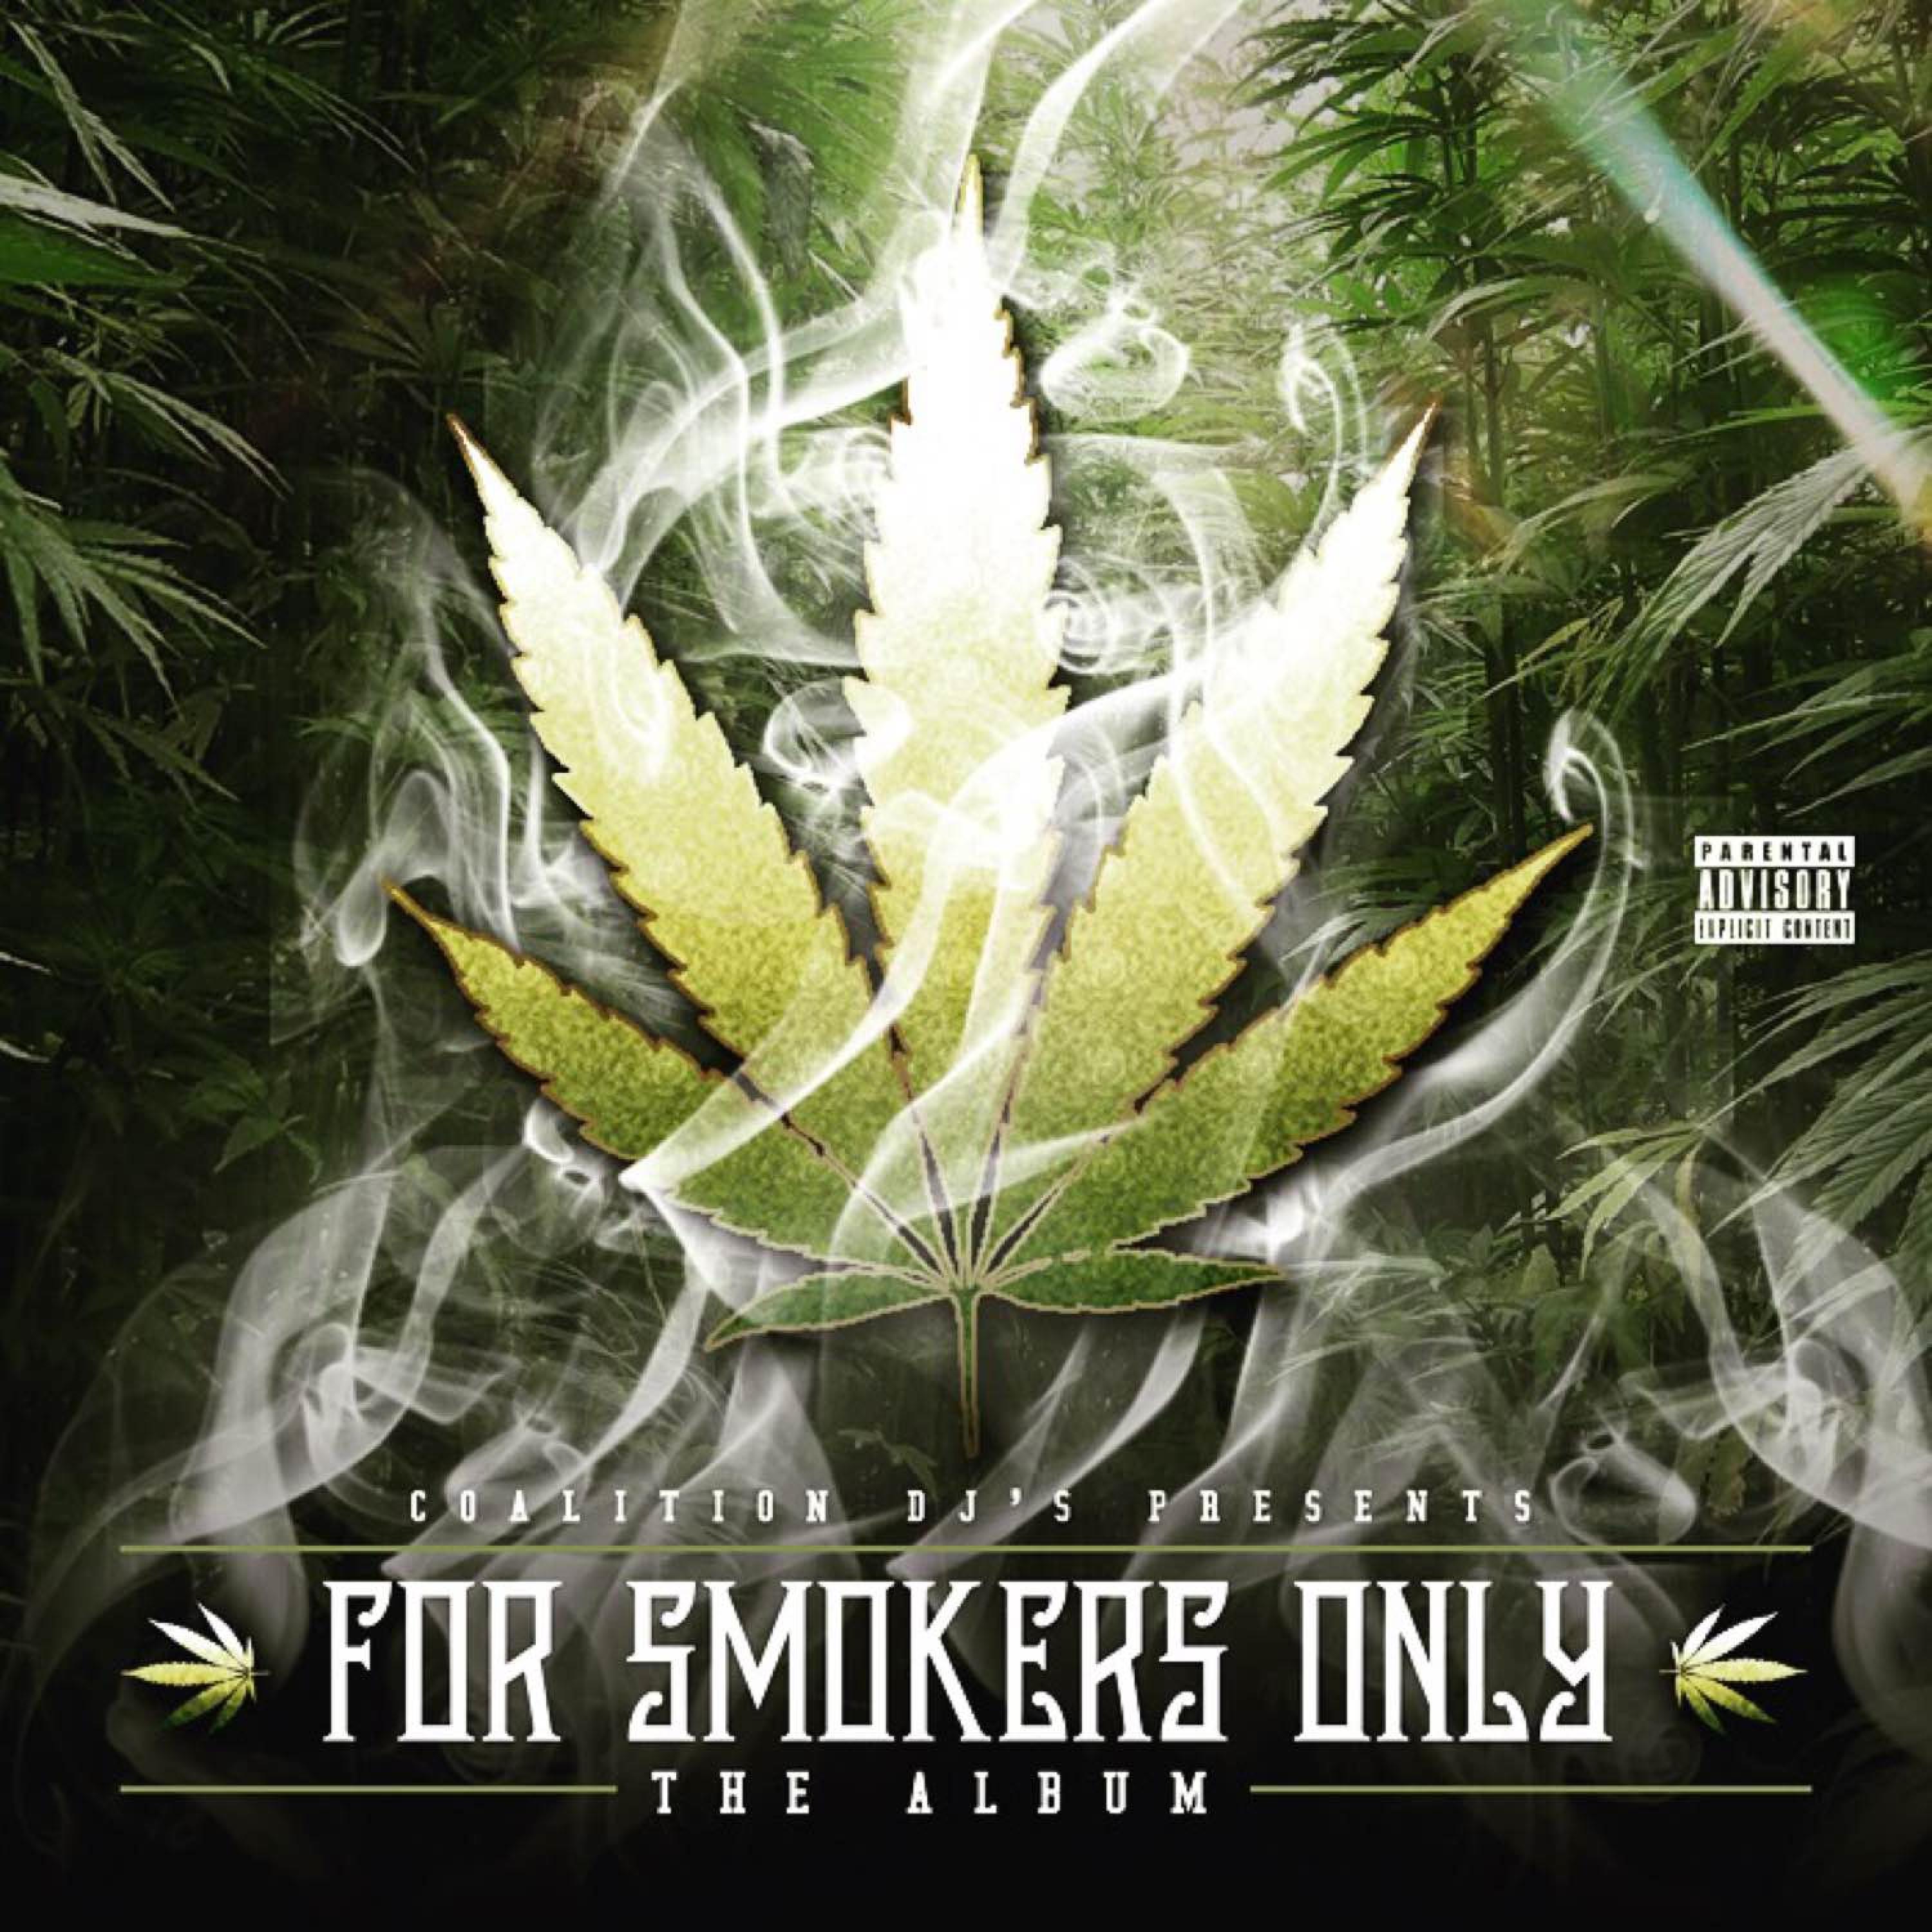 For Smokers Only - The Album